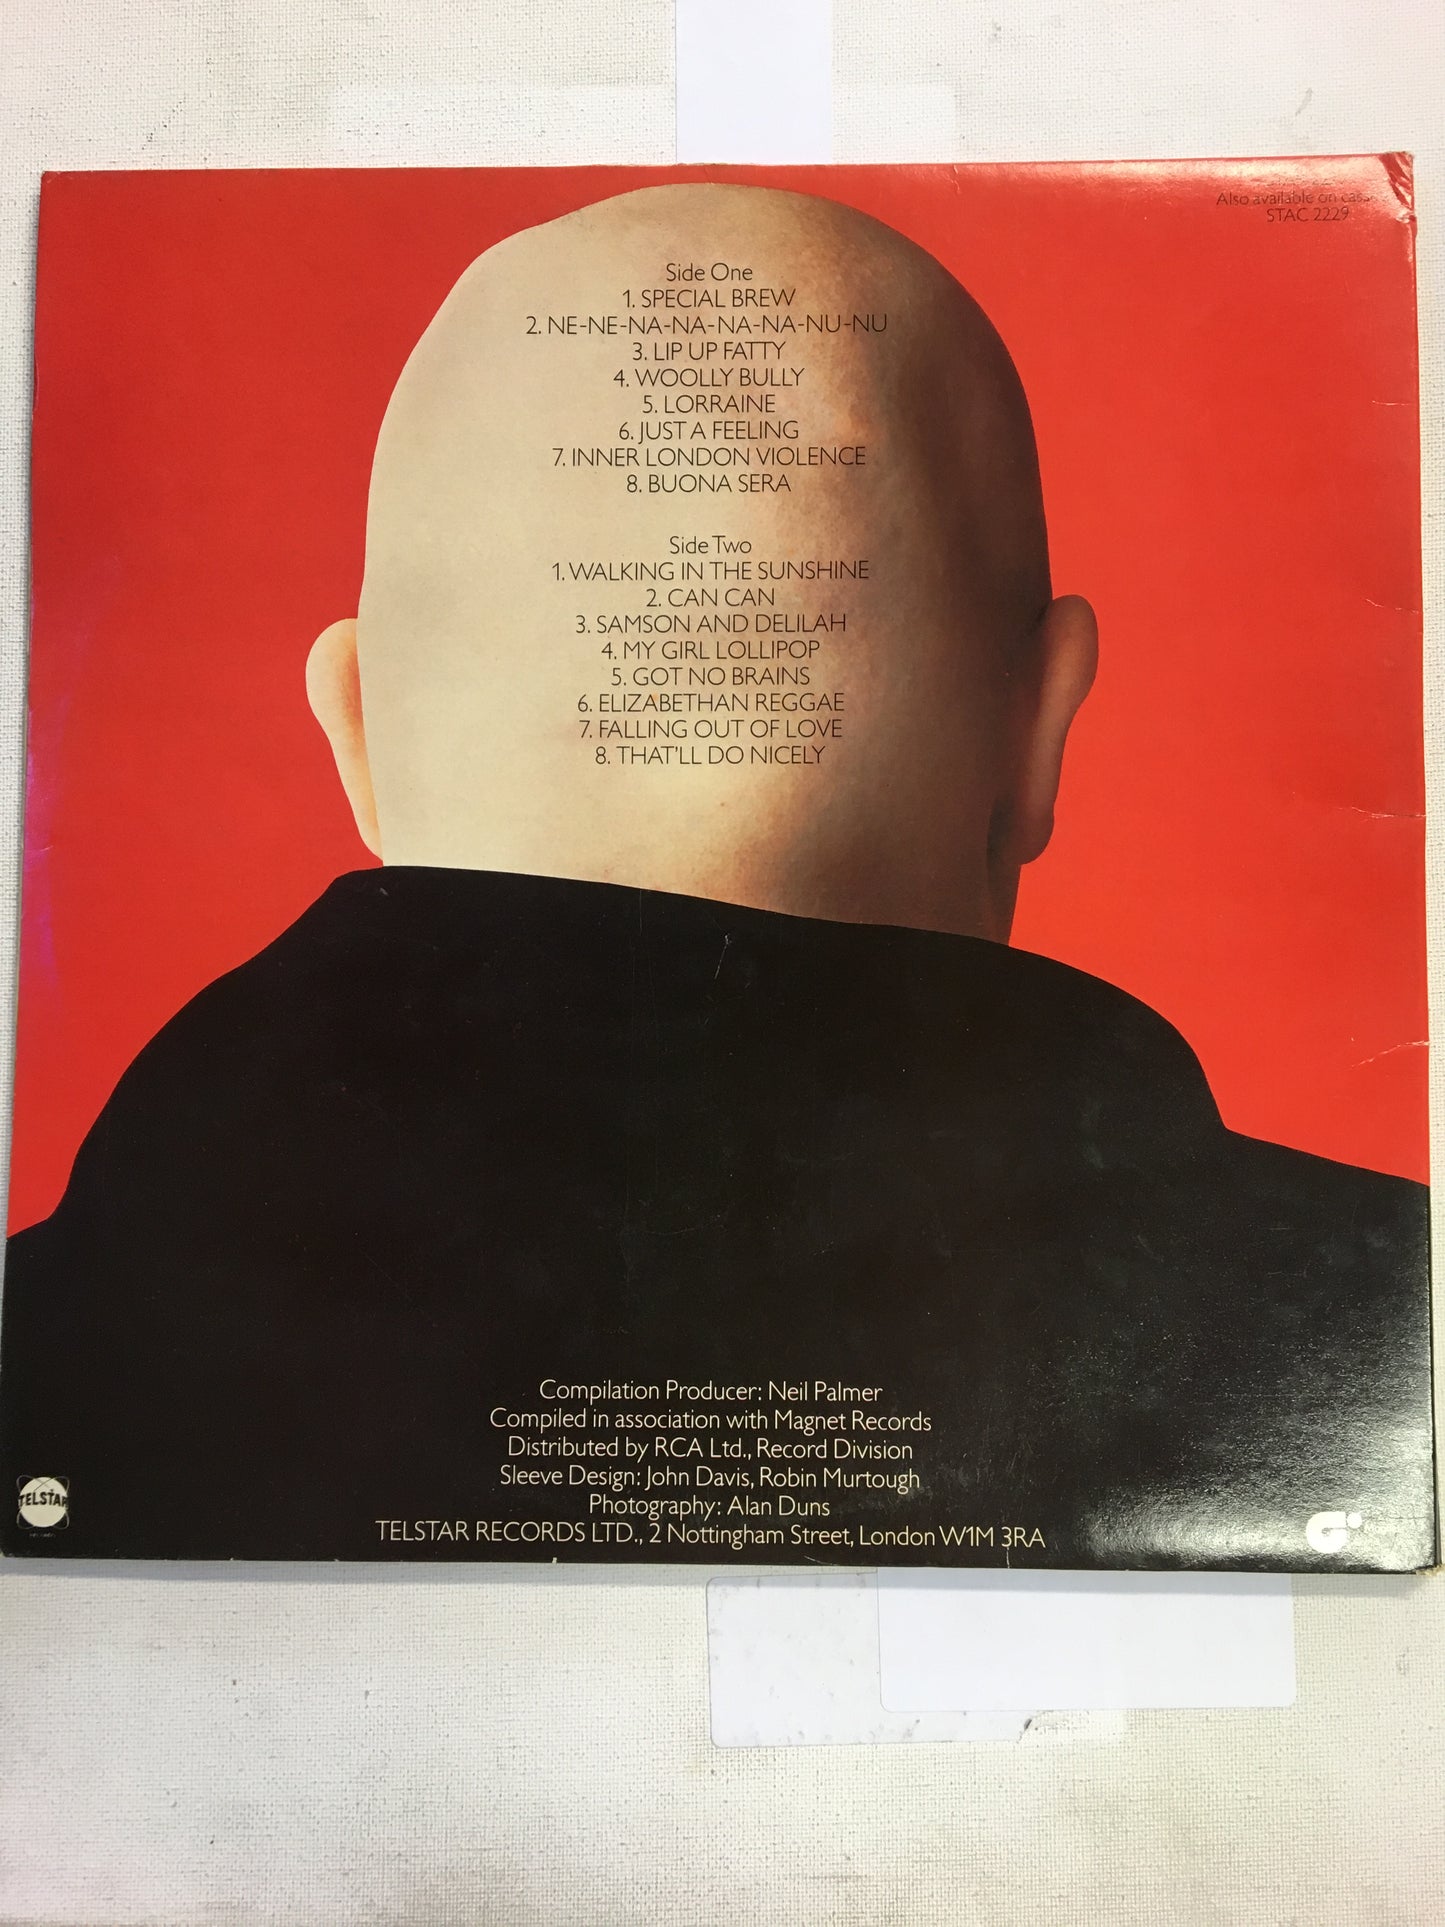 BAD MANNERS: THE HEIGHT OF BAD MANNERS 1LP VINYL RECORD (1983)